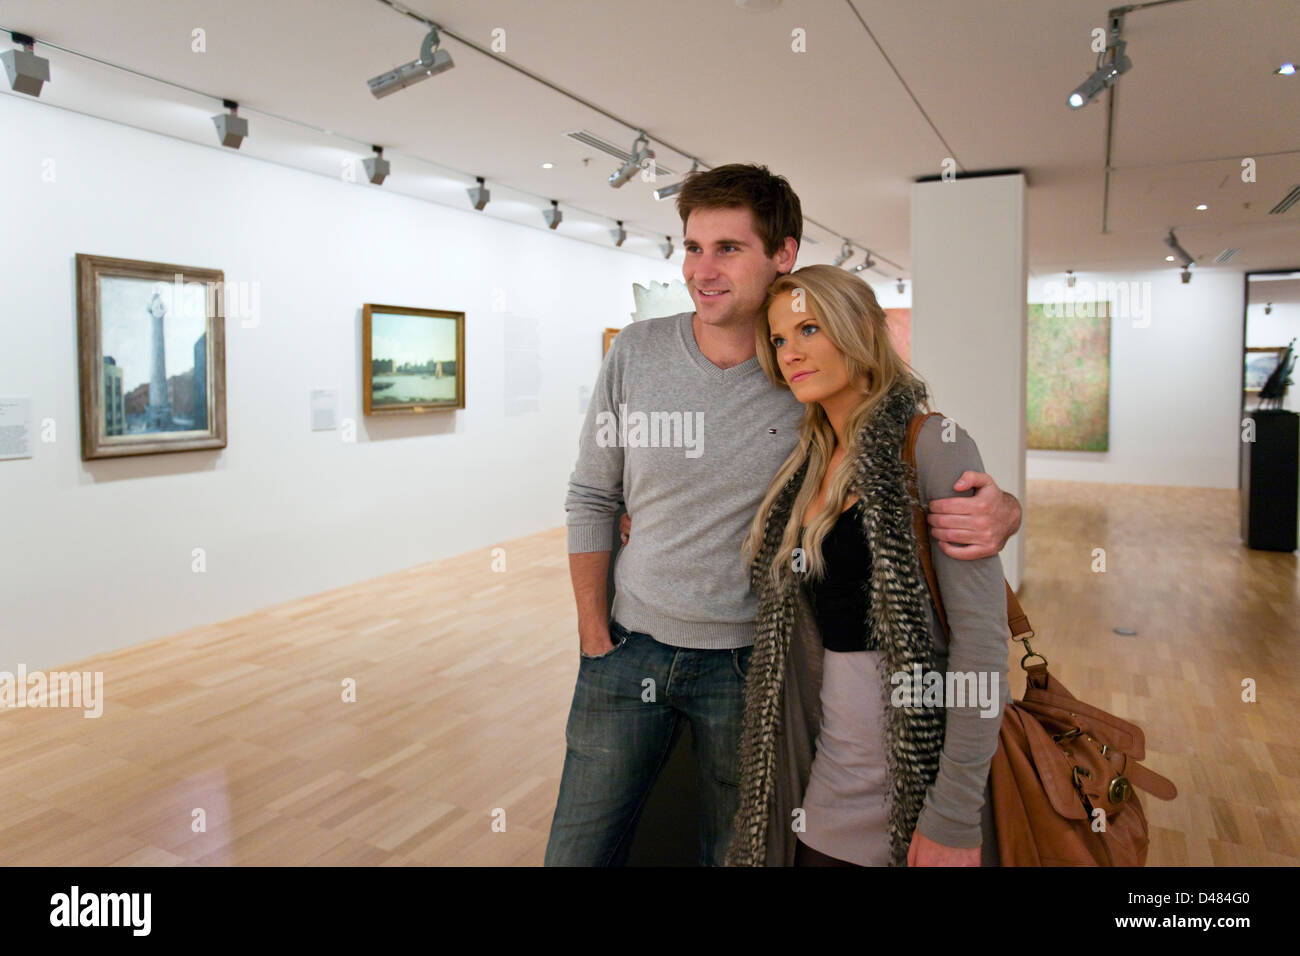 Couple looking at paintings in gallery. National Gallery of Victoria, Melbourne, Victoria, Australia Stock Photo